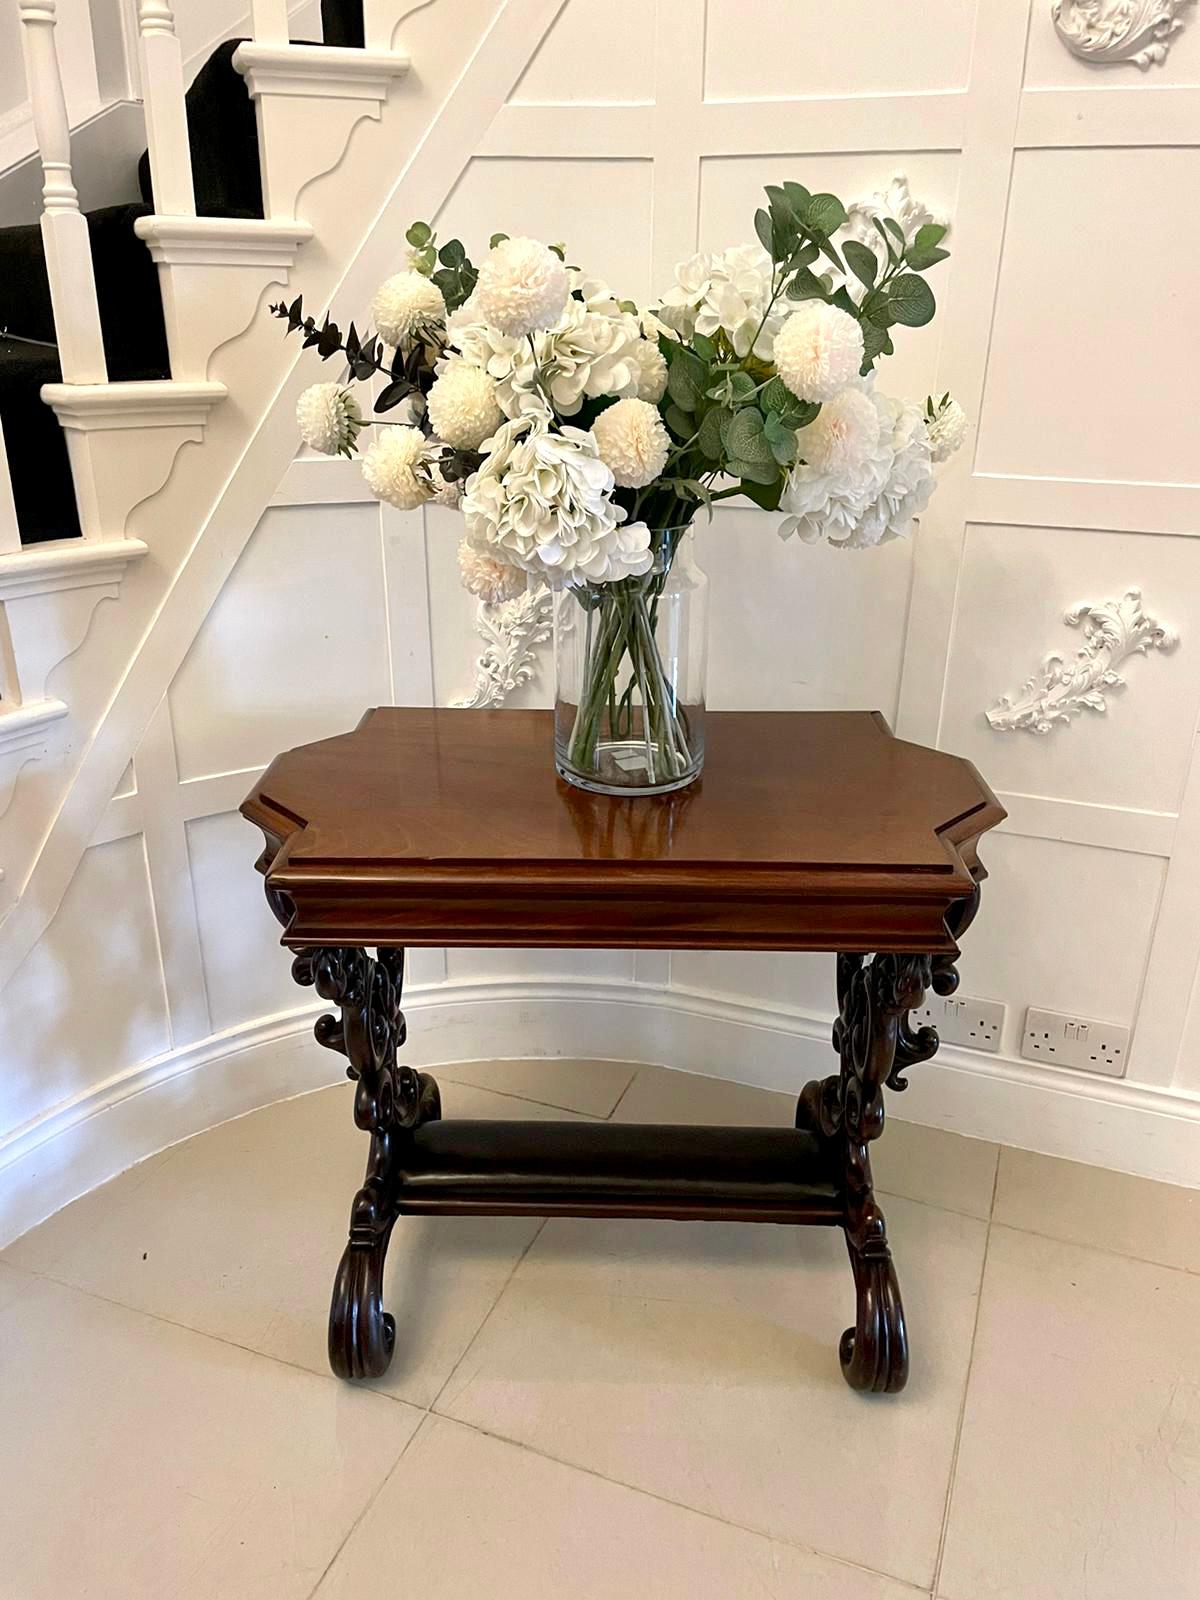 Outstanding 19th Century Antique Carved Mahogany Freestanding Centre/Side Table In Good Condition For Sale In Suffolk, GB